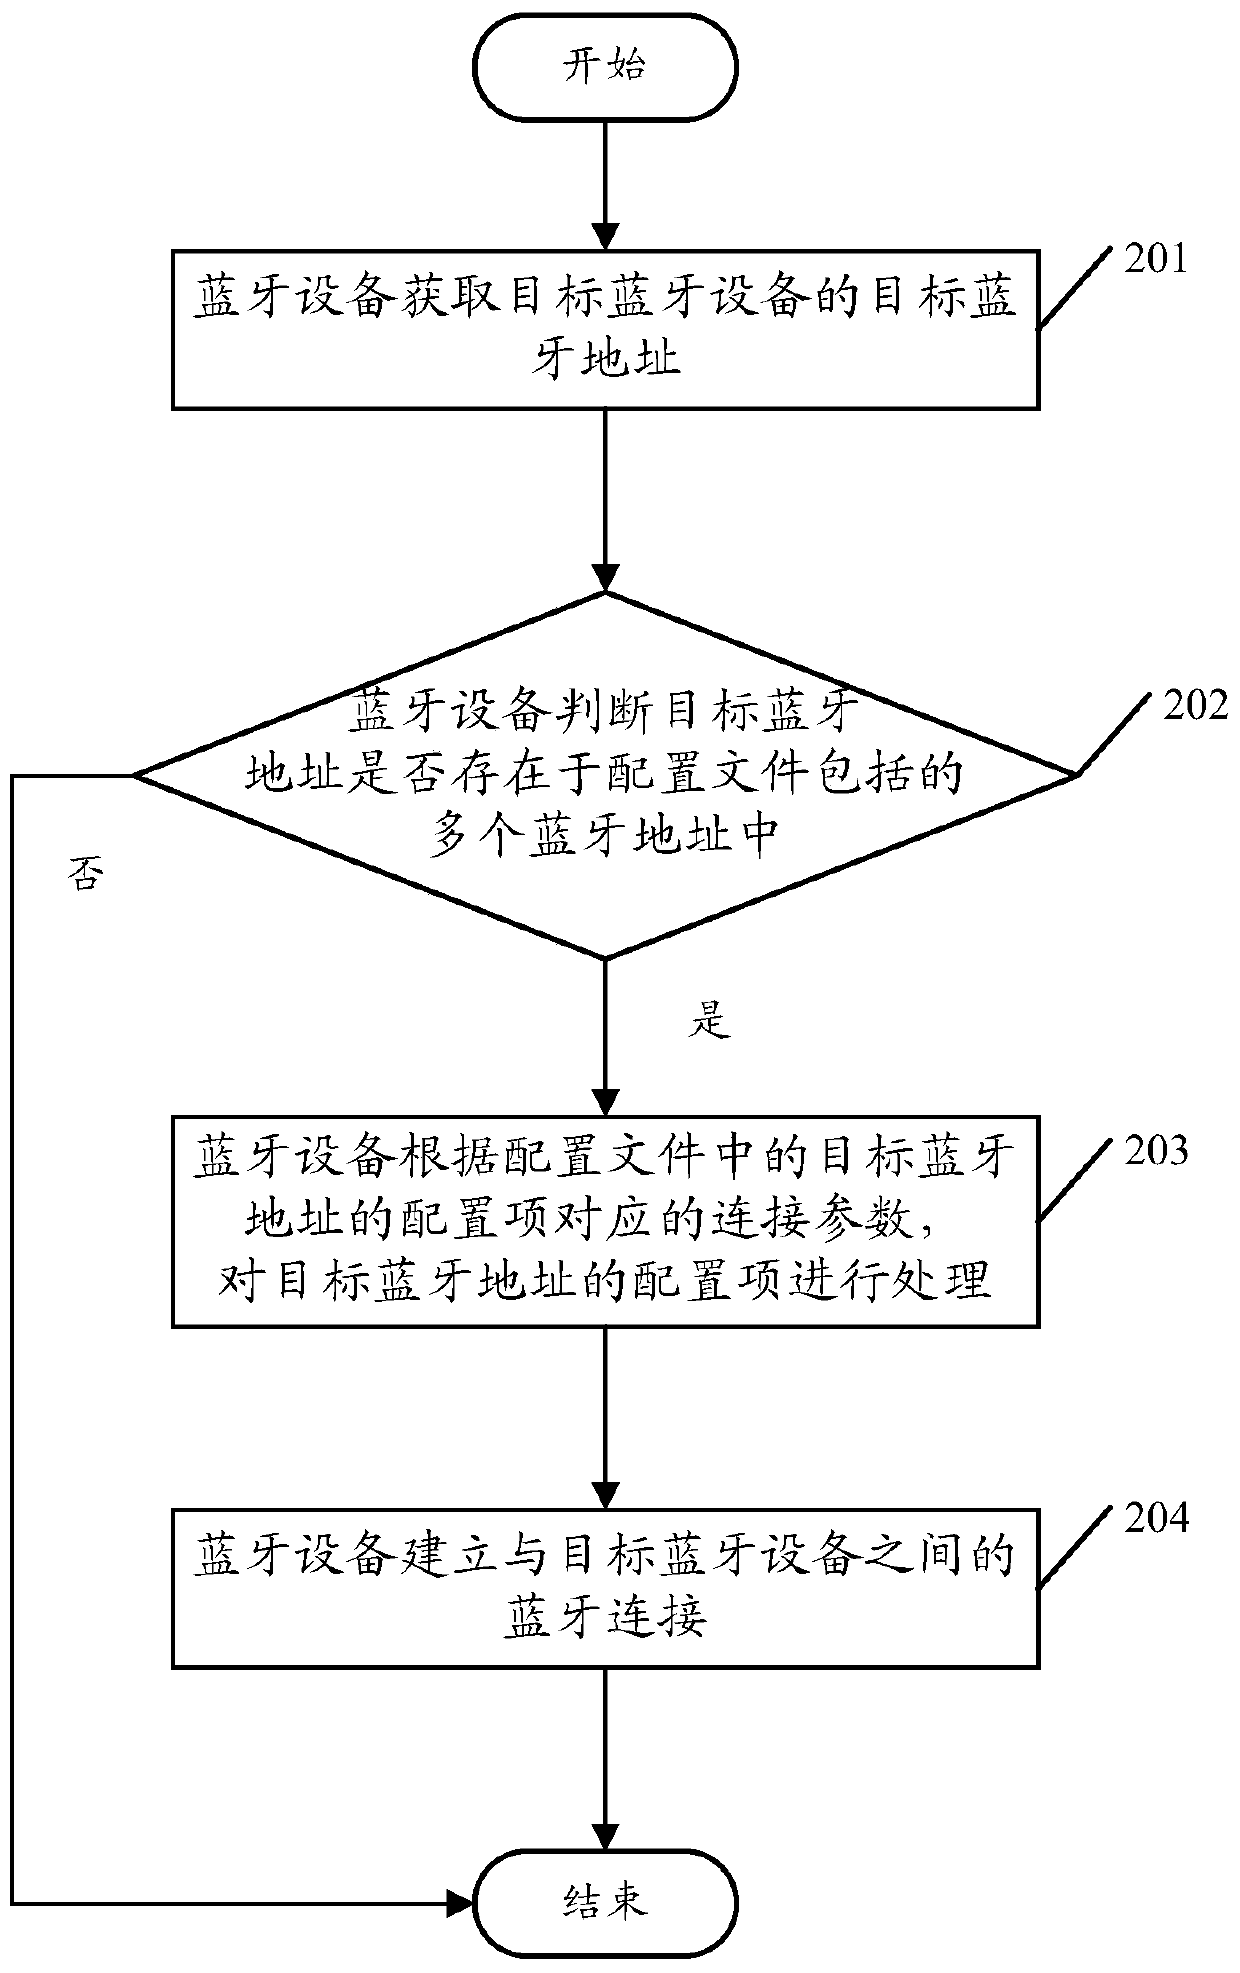 A Bluetooth device connection method and Bluetooth device